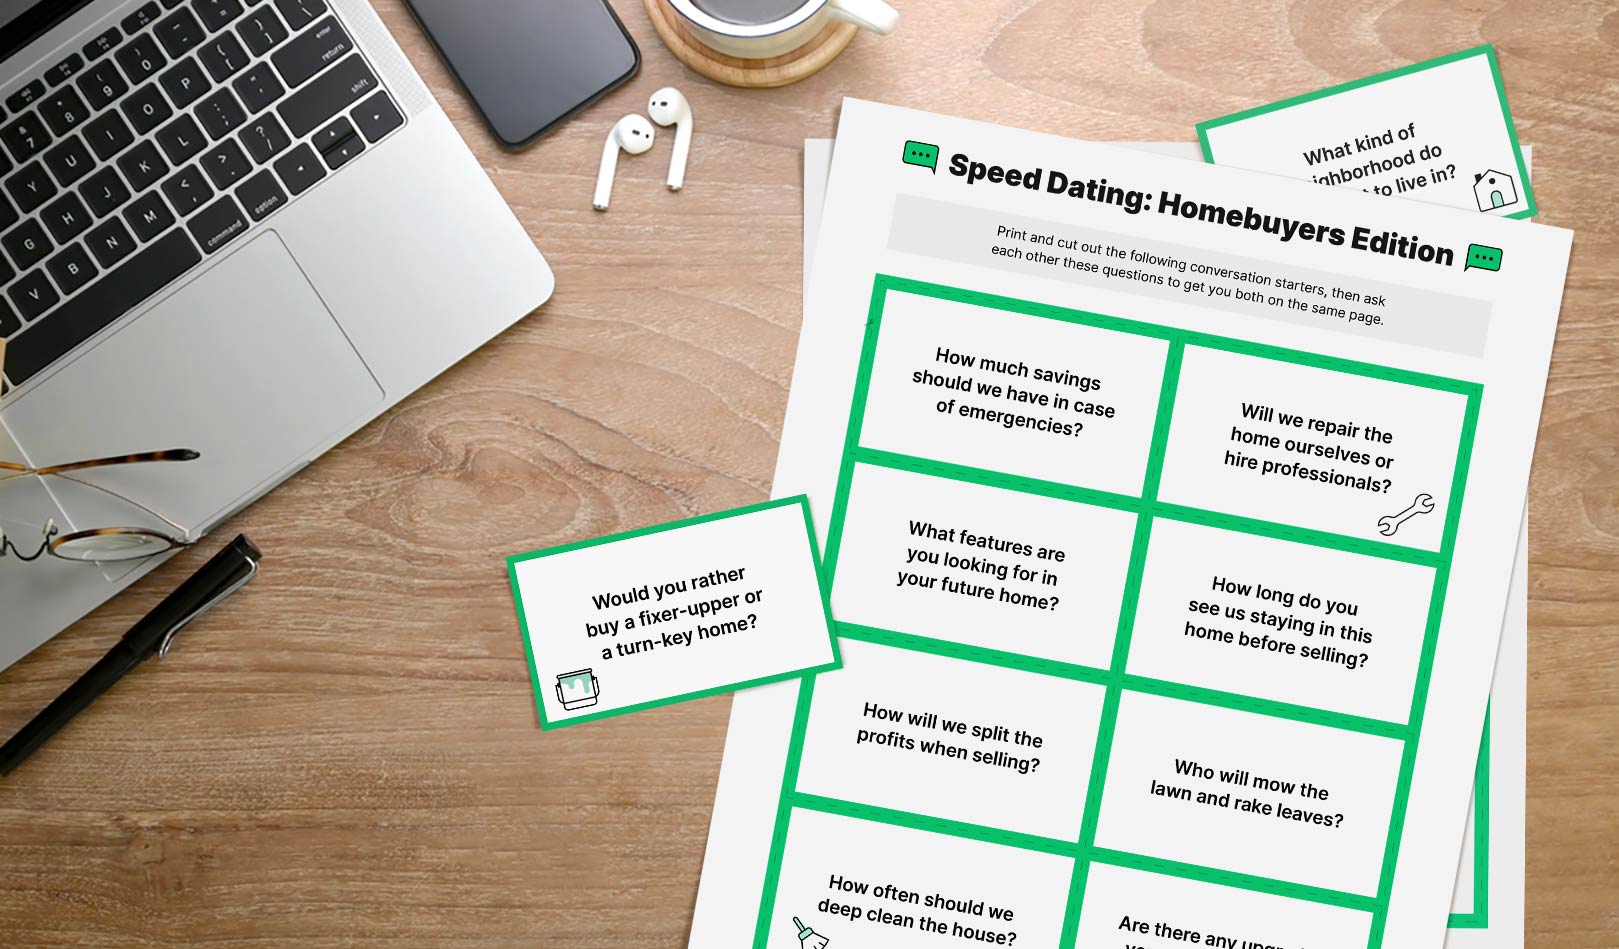 Printable speed dating cards on a desk next to a laptop and earbuds